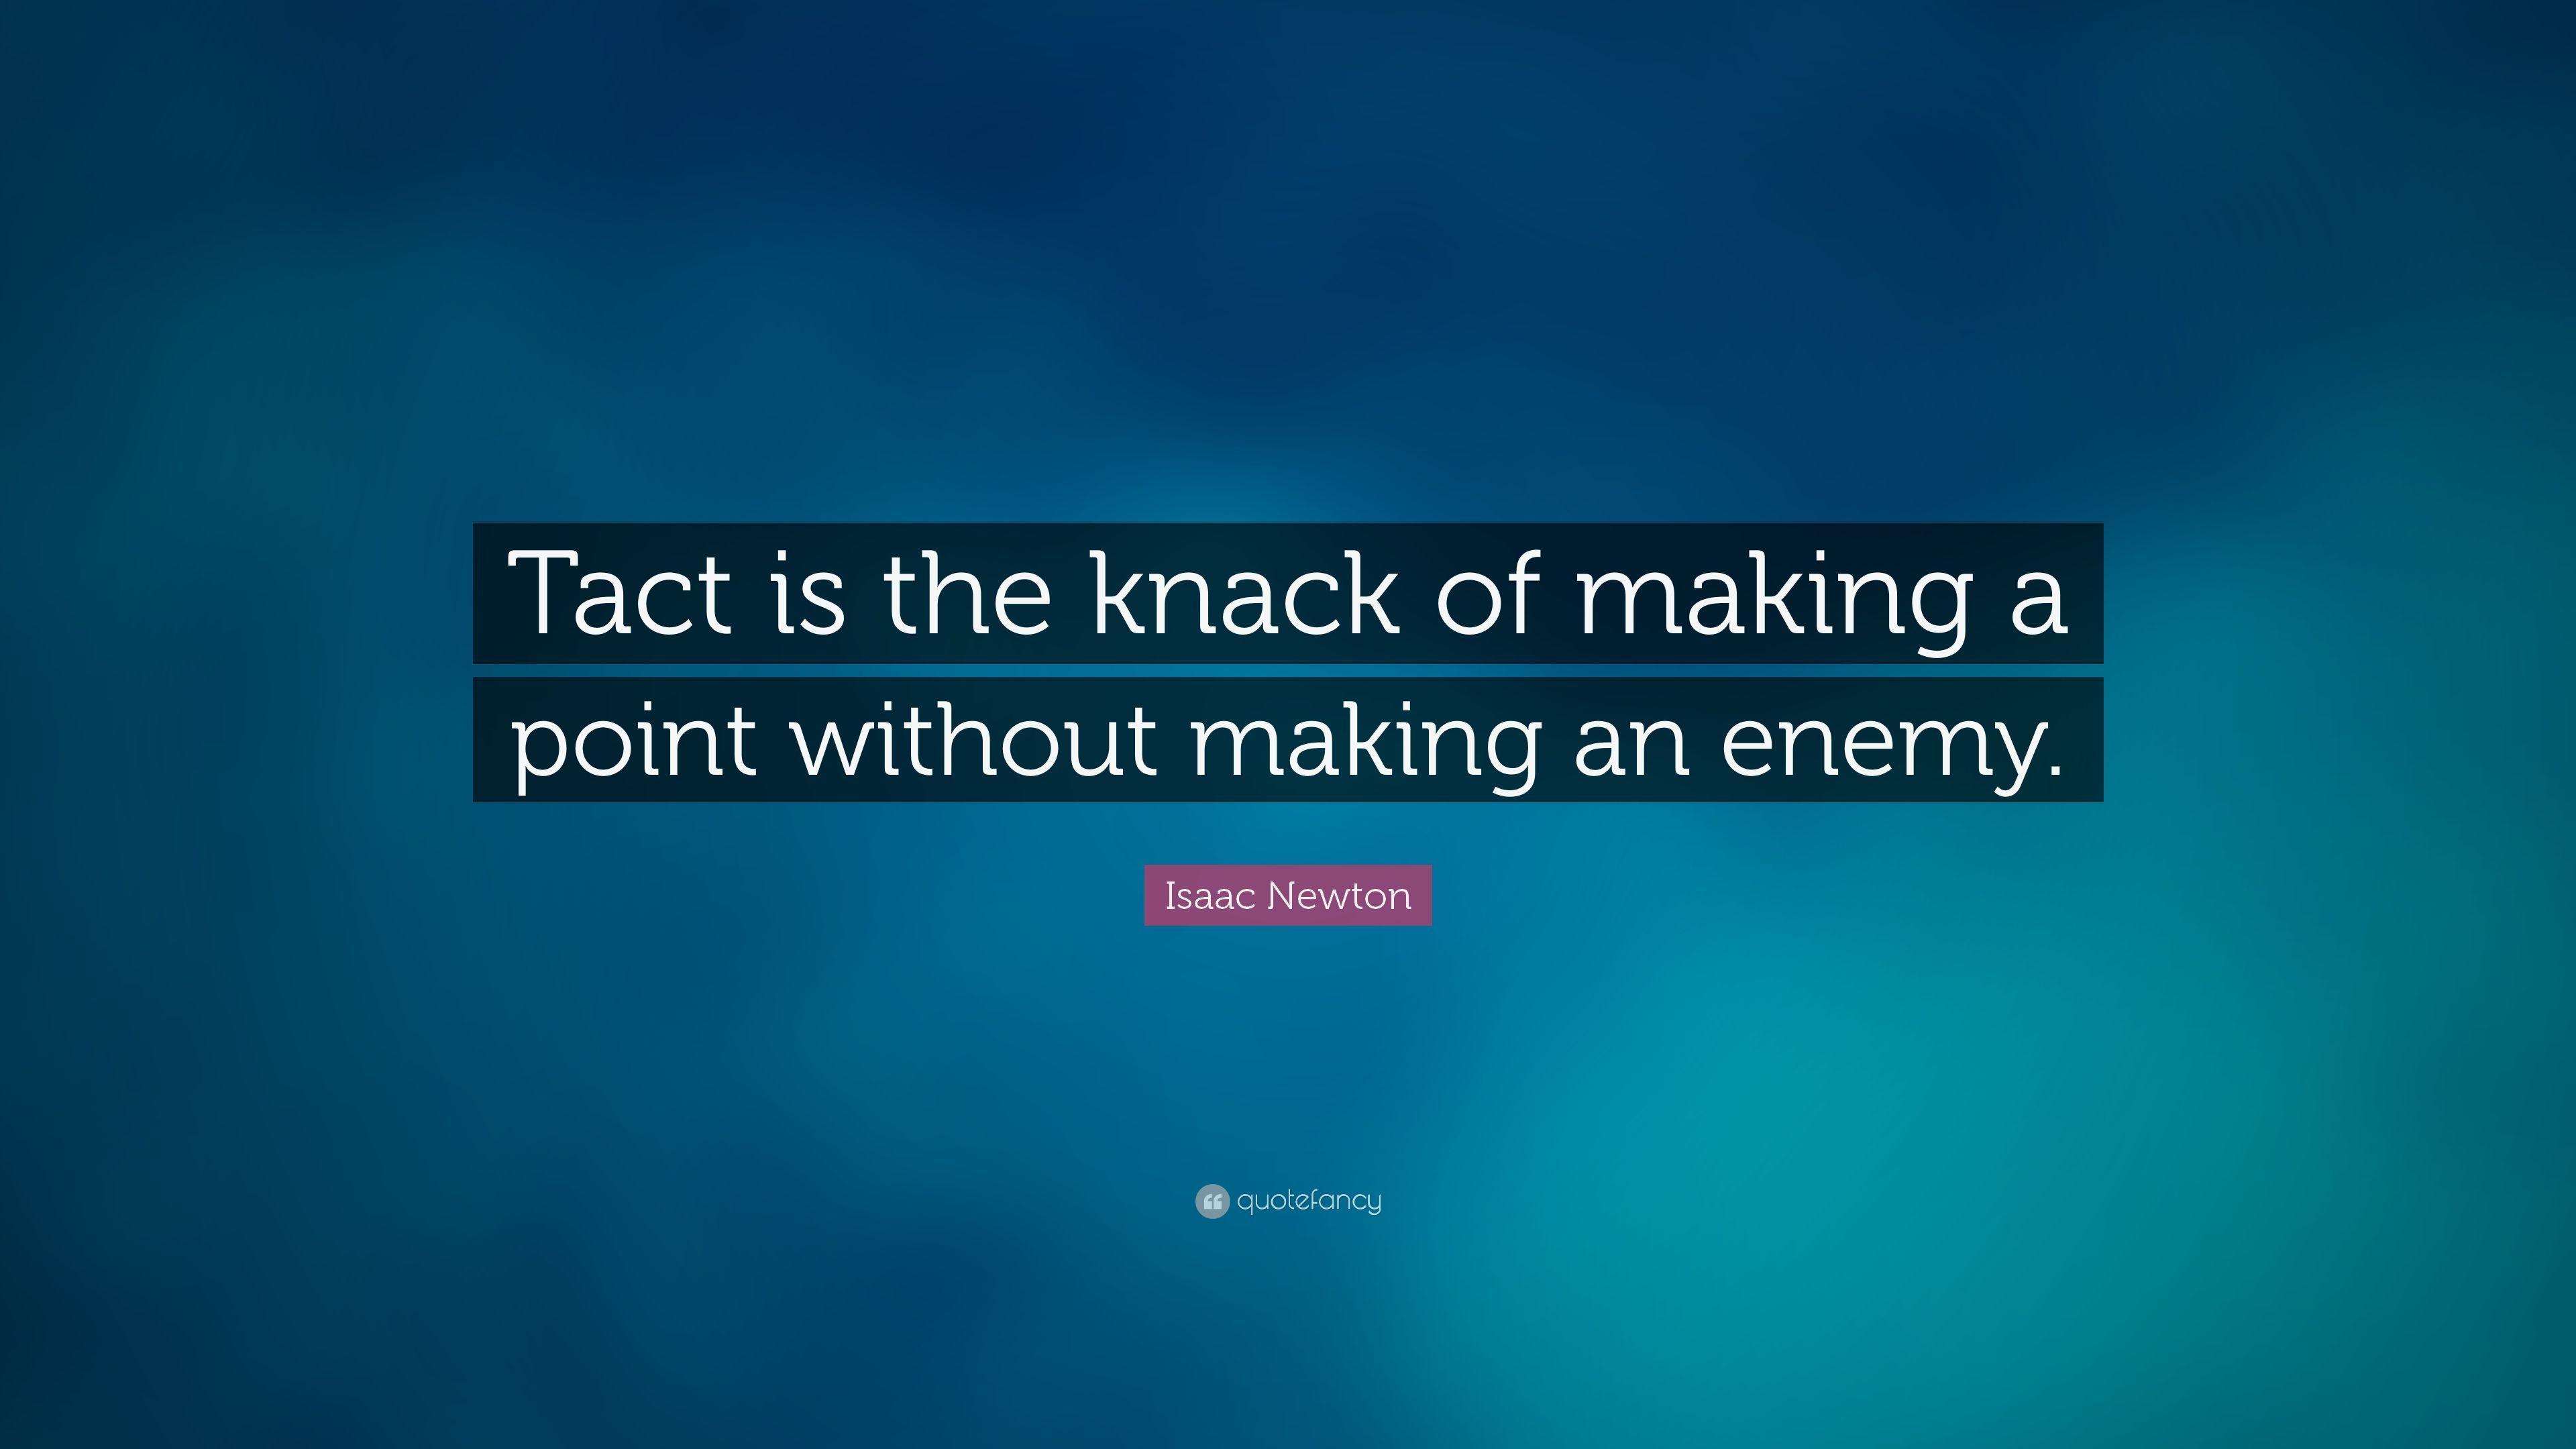 Isaac Newton Quote: “Tact is the knack of making a point without